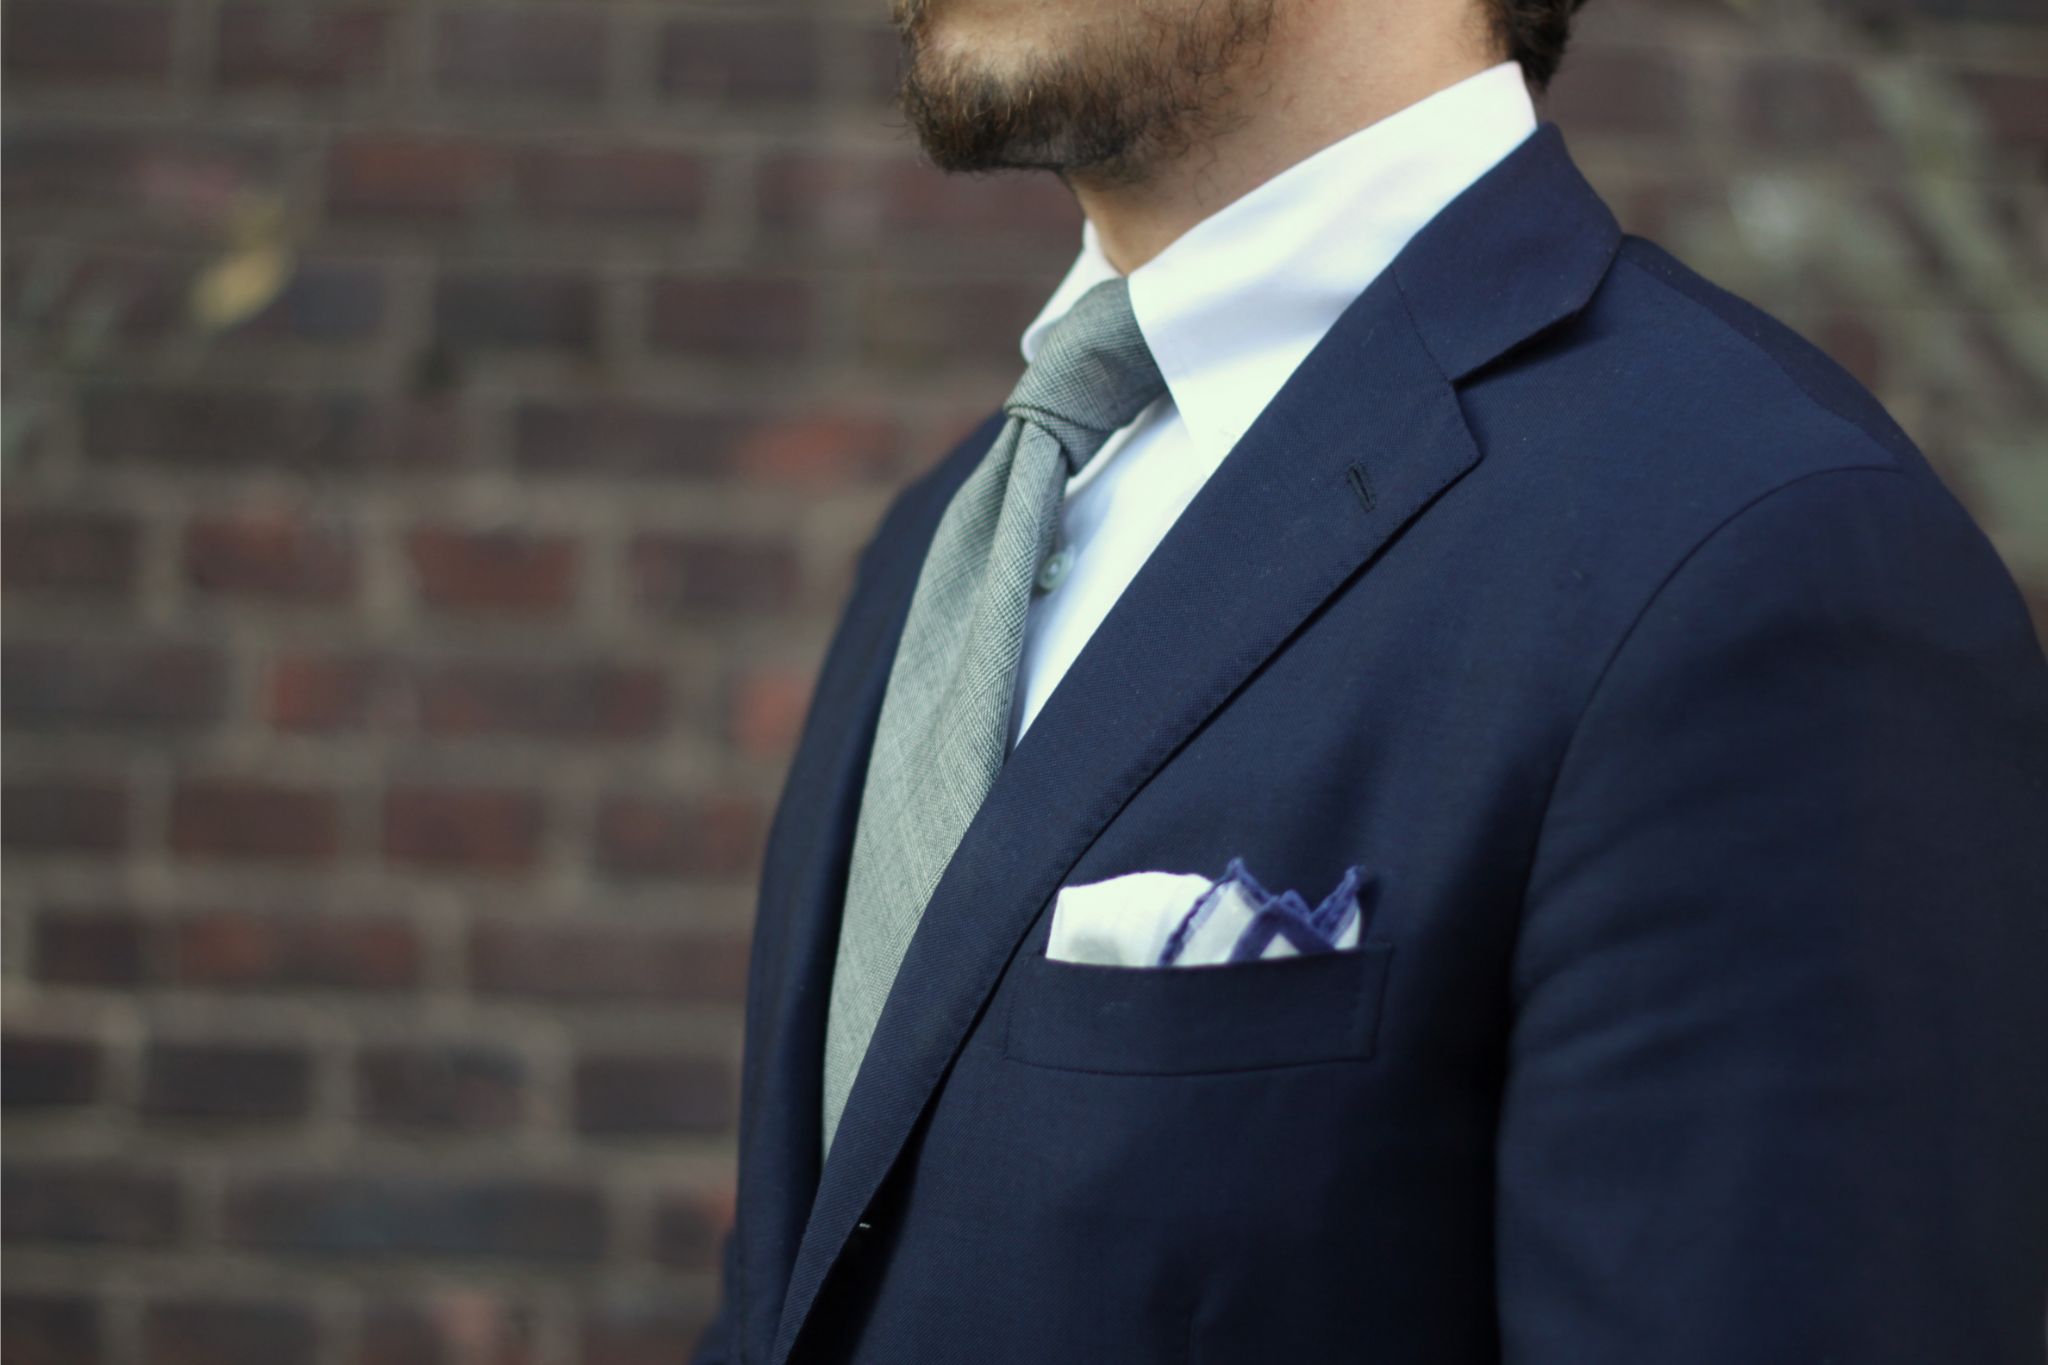 Dark blue suit for business casual - Suit with button-down collar shirt and gray wool tie